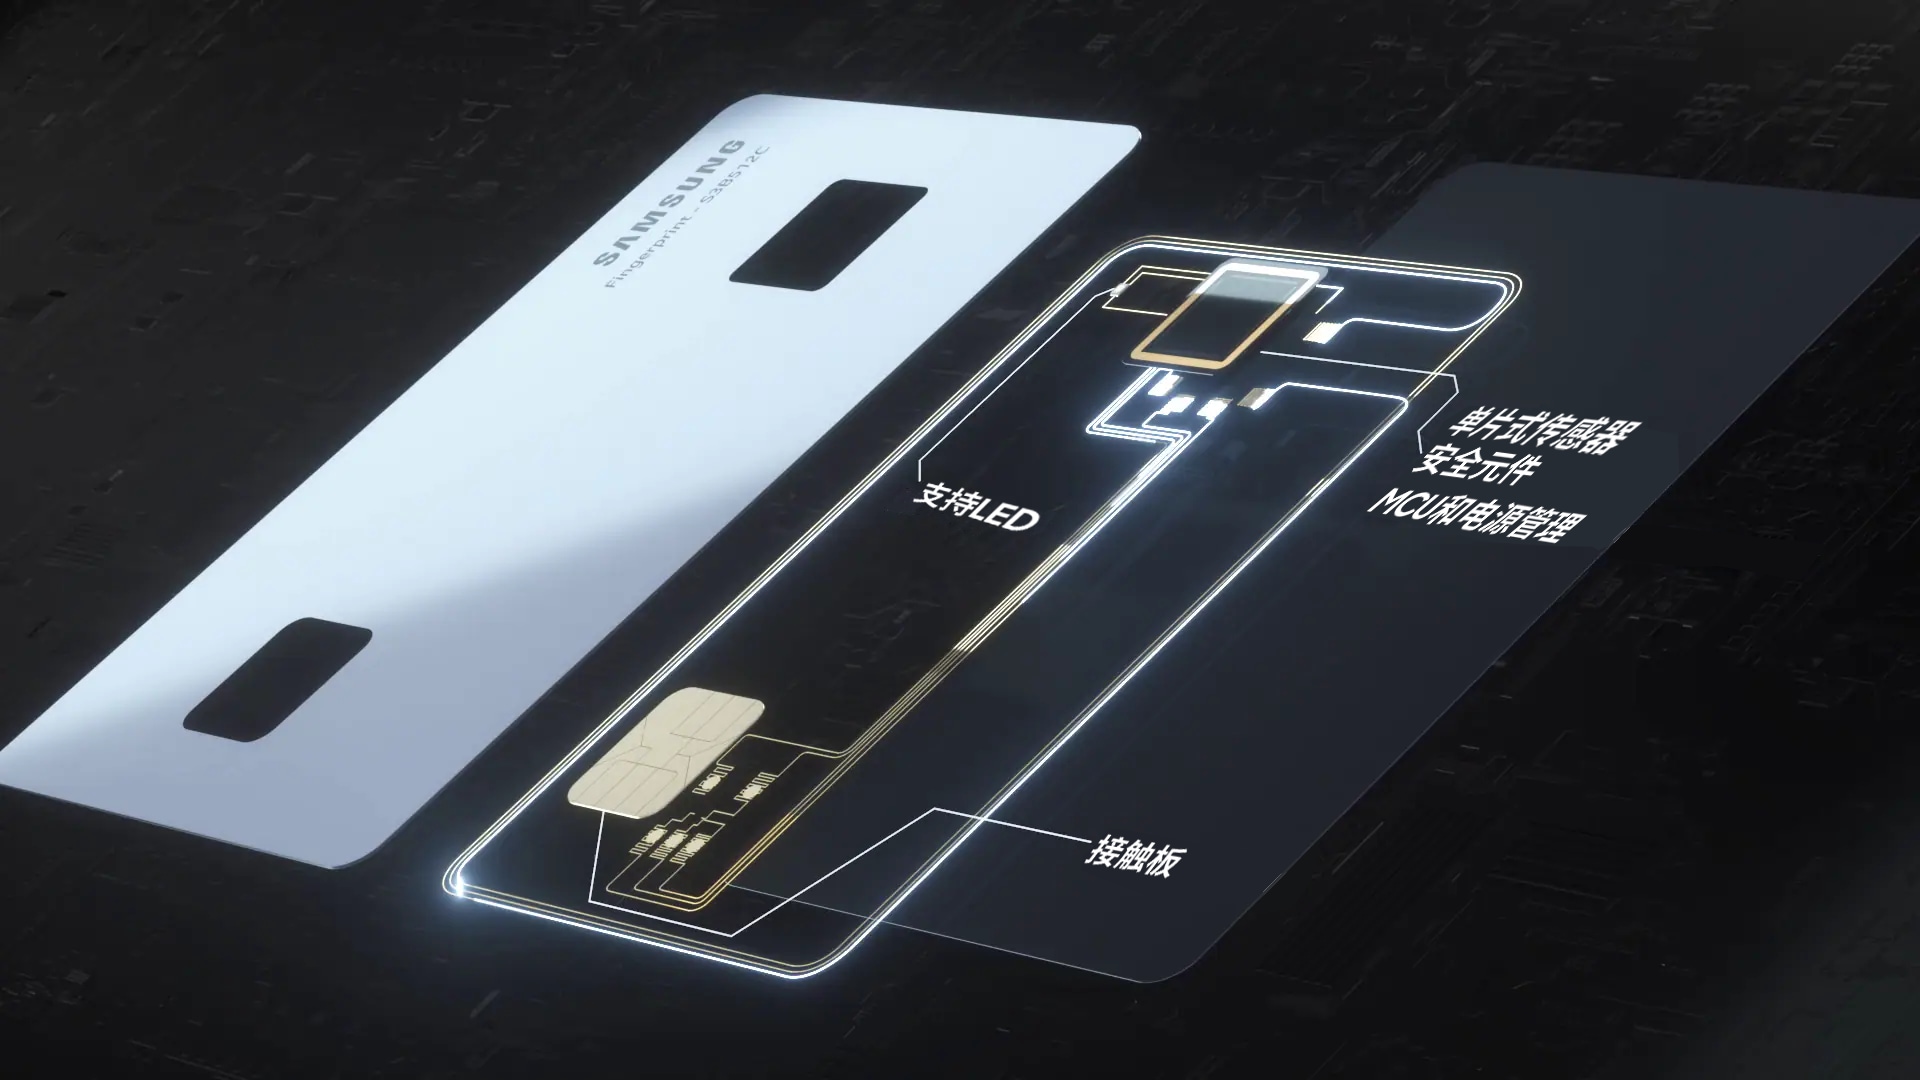 Credit card with Samsung's biometric card IC one-chip solution